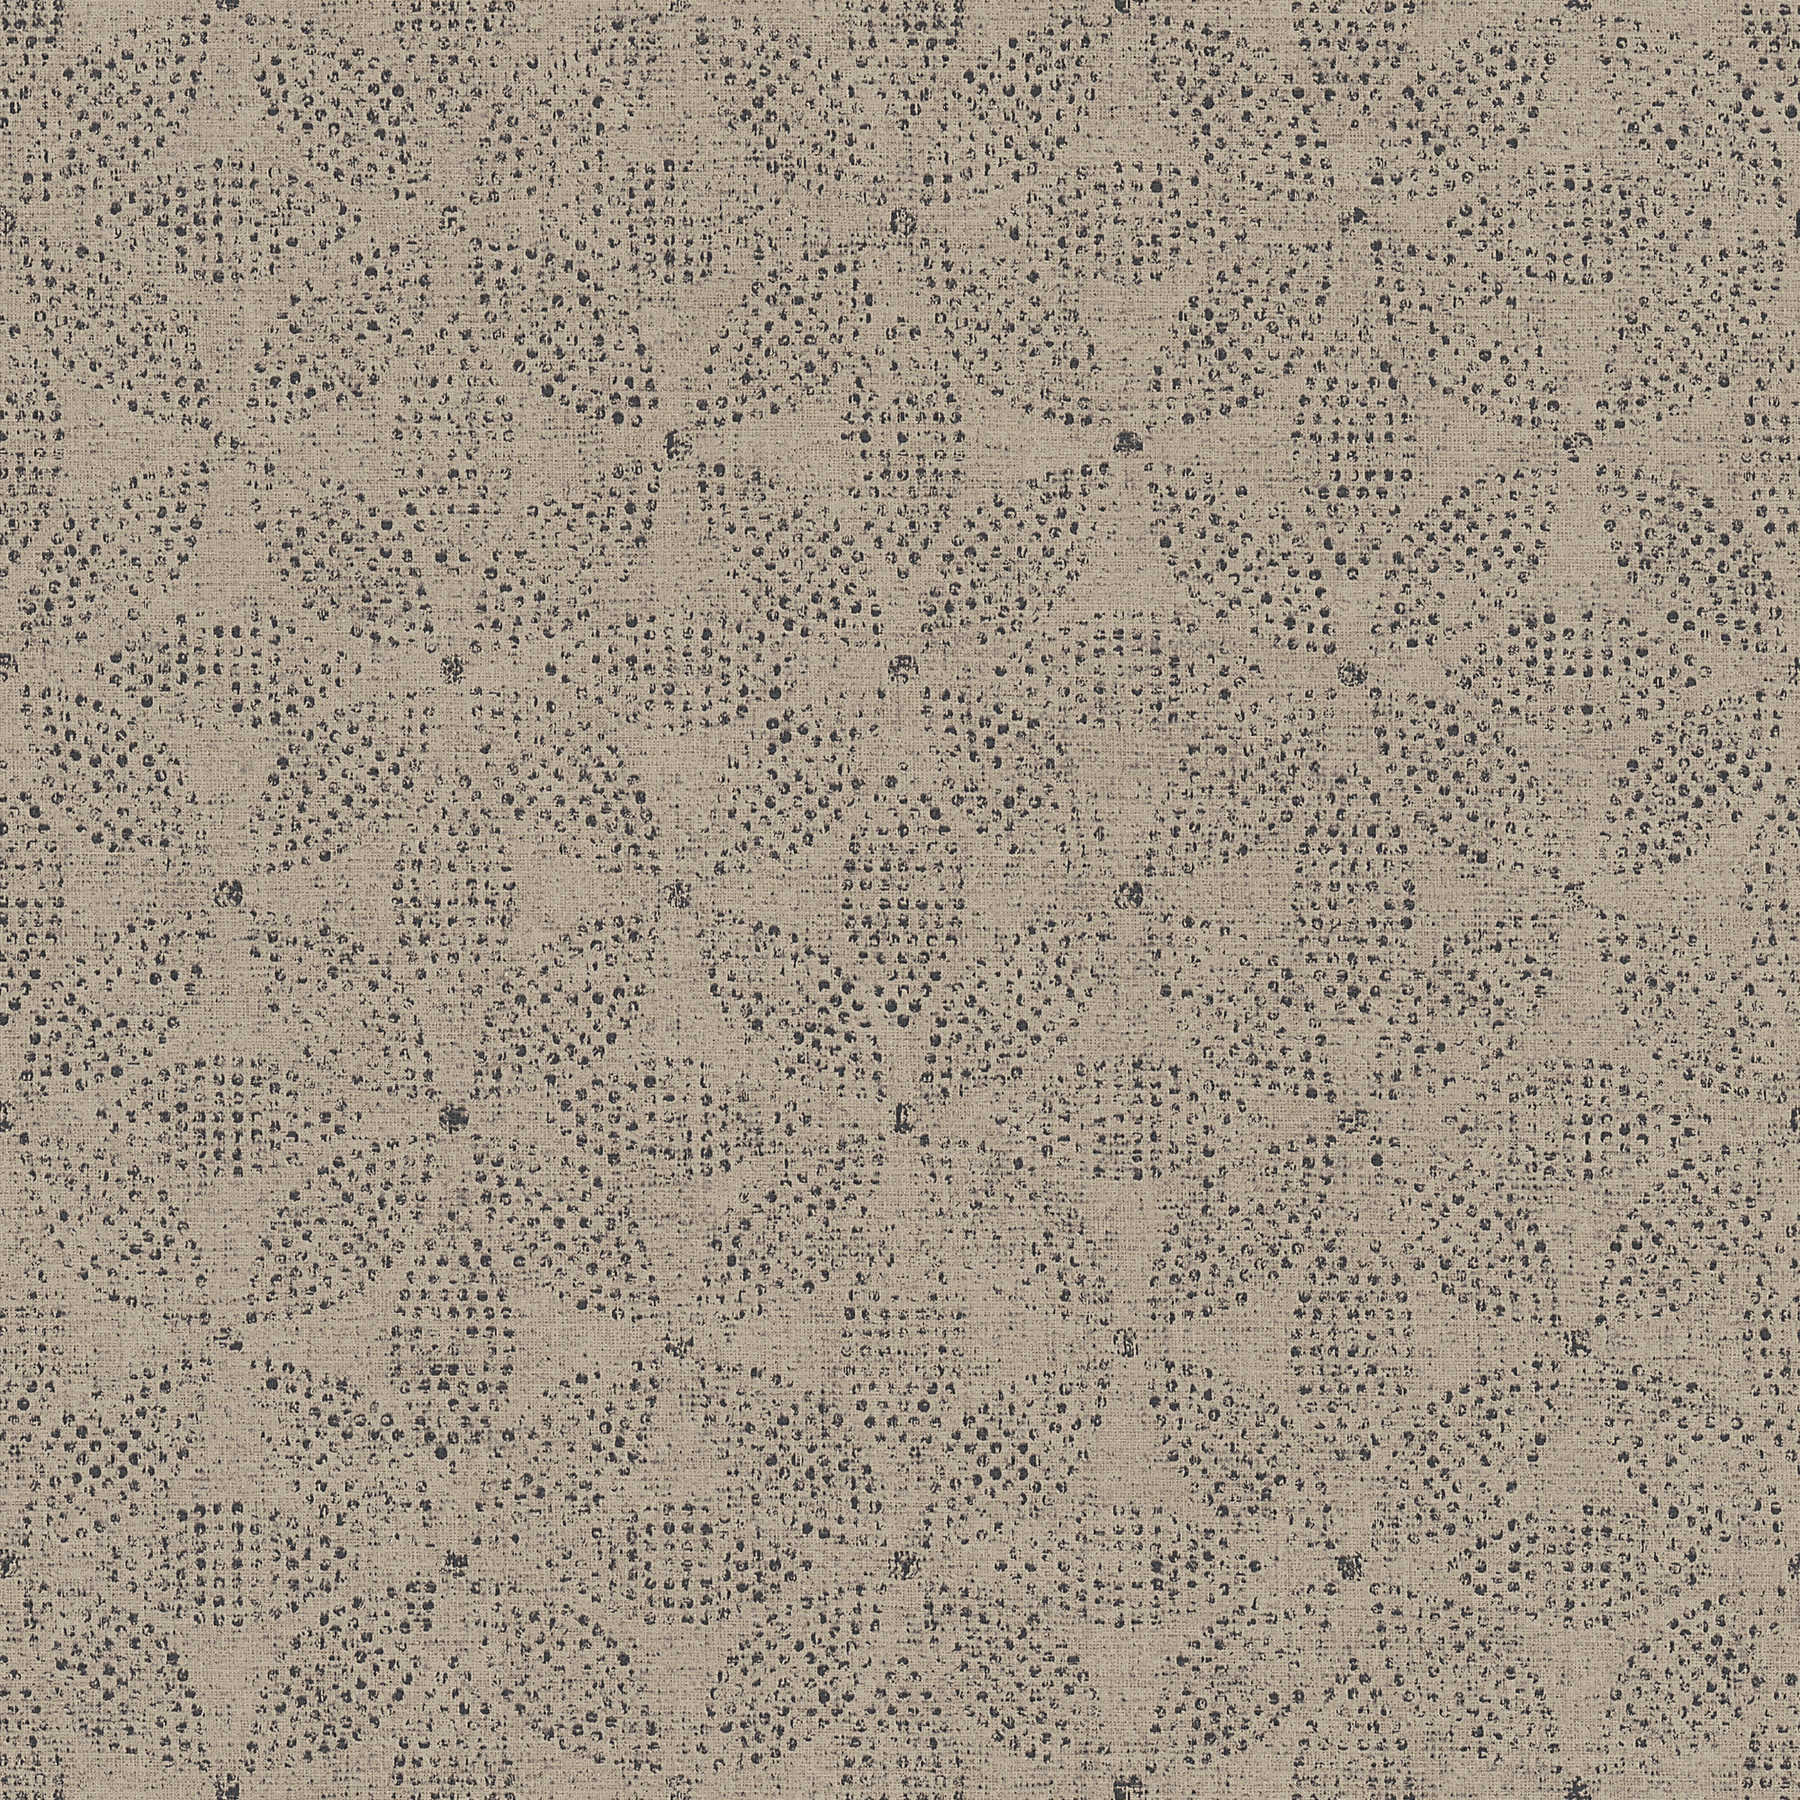 wallpaper African Style graphic dot painting - black, beige, grey
